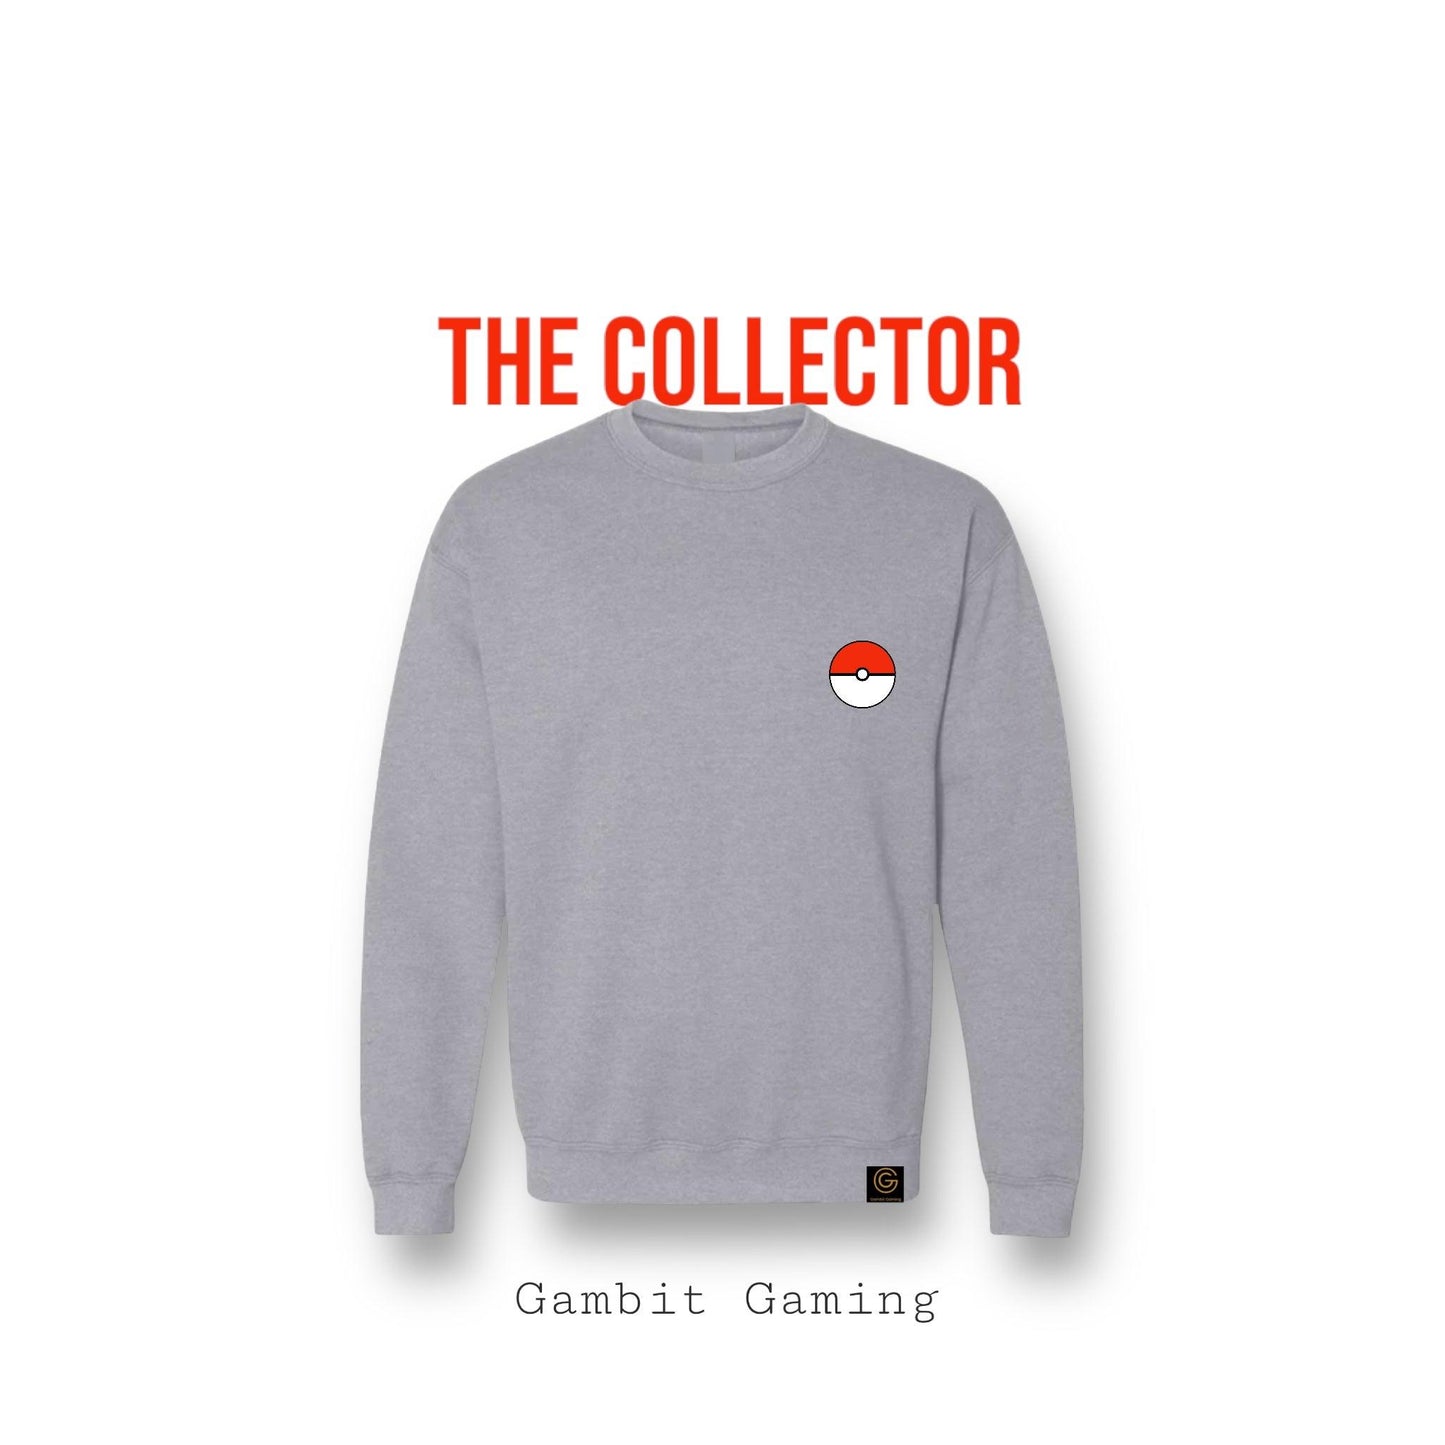 The Collector Sweater - Gambit Gaming